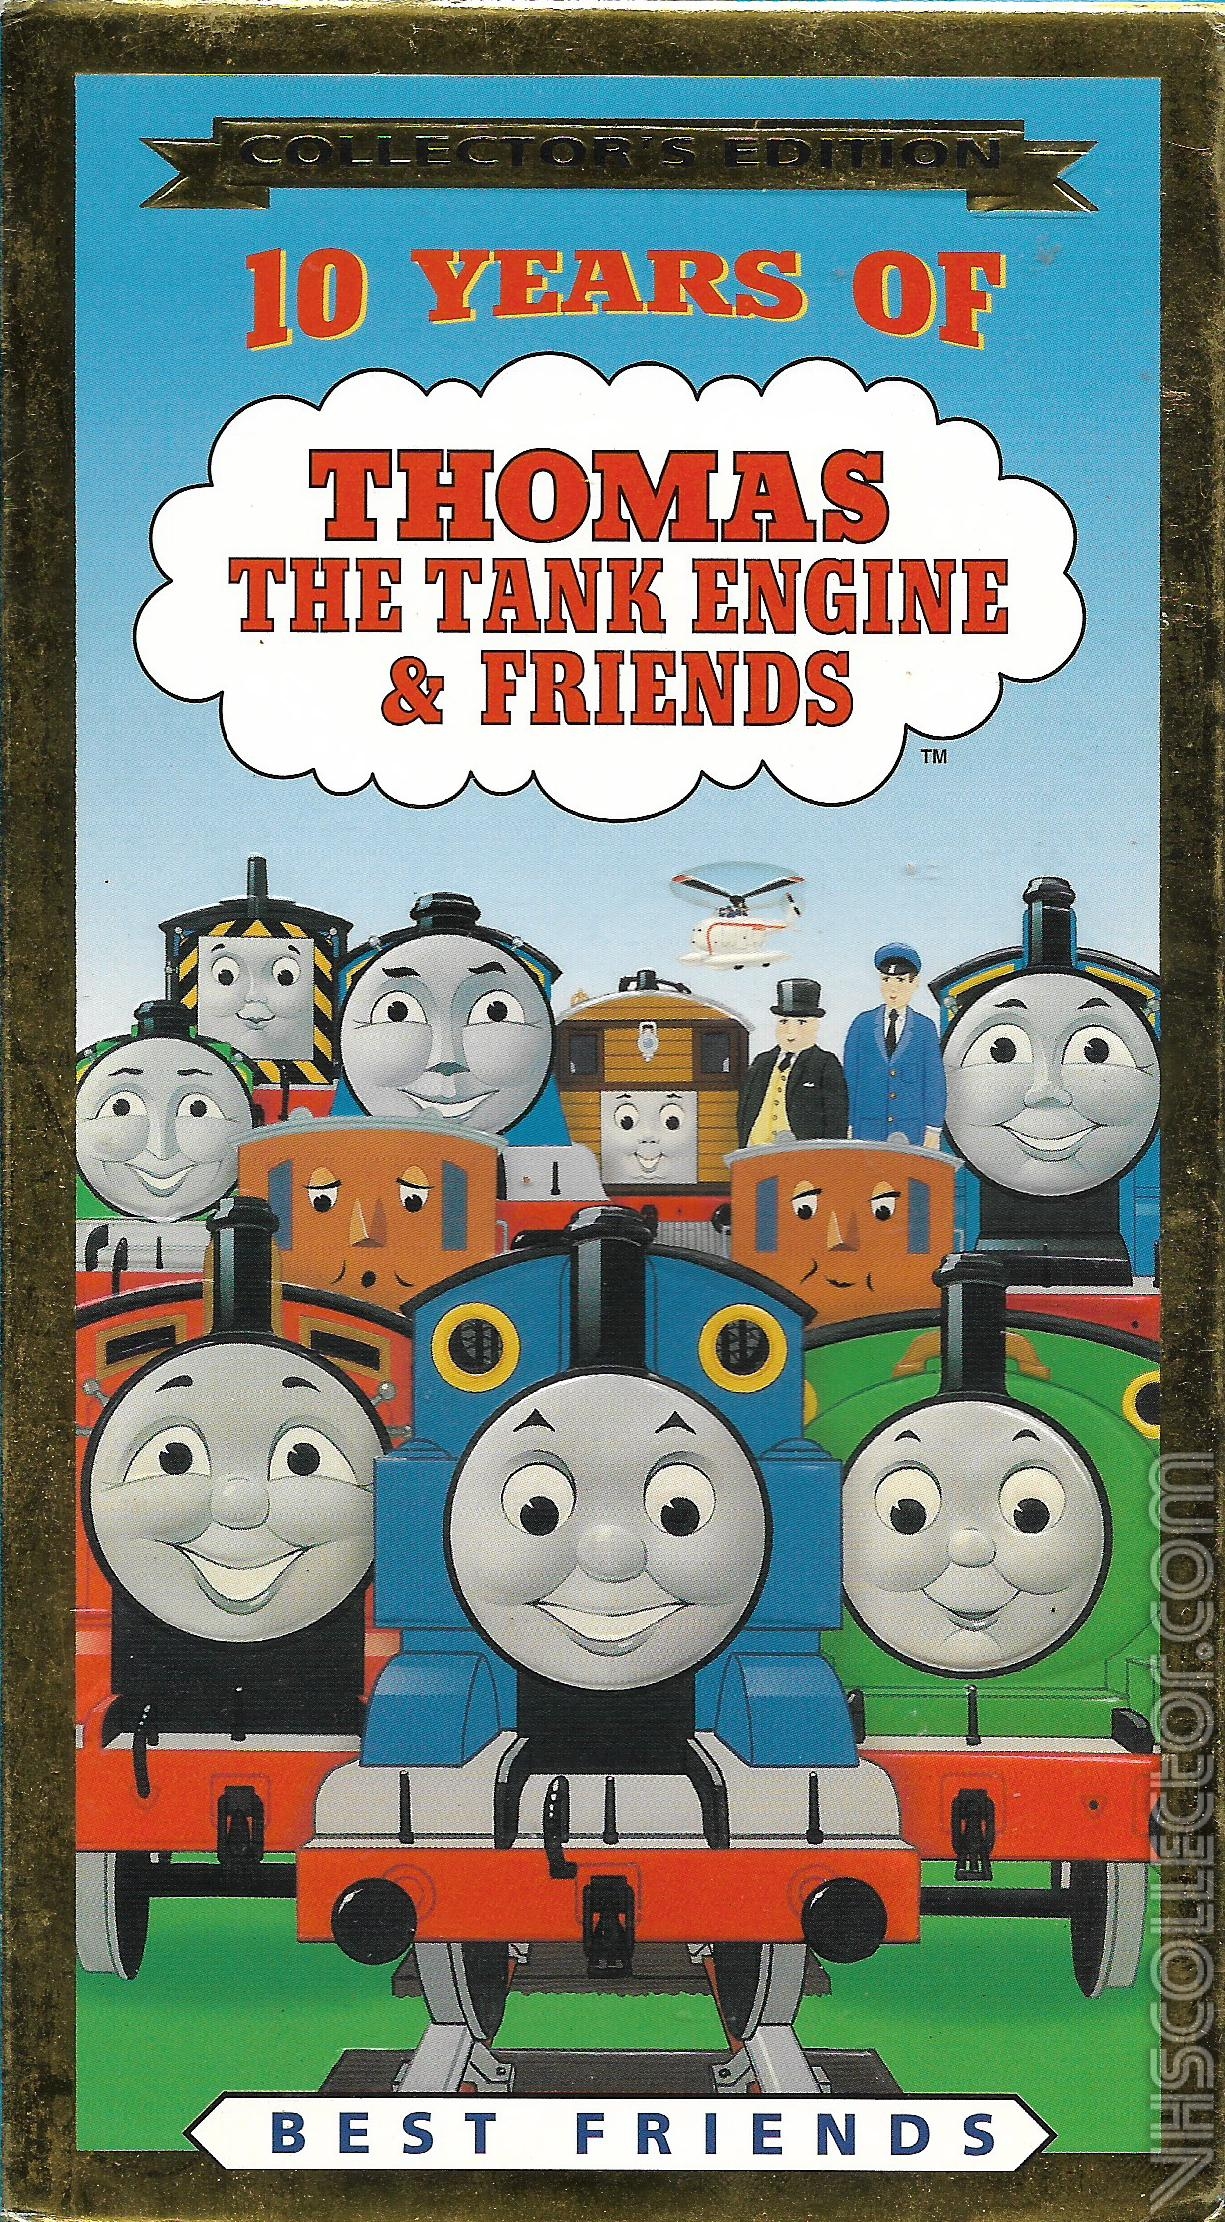 Thomas The Tank Engine And Friends Vhs